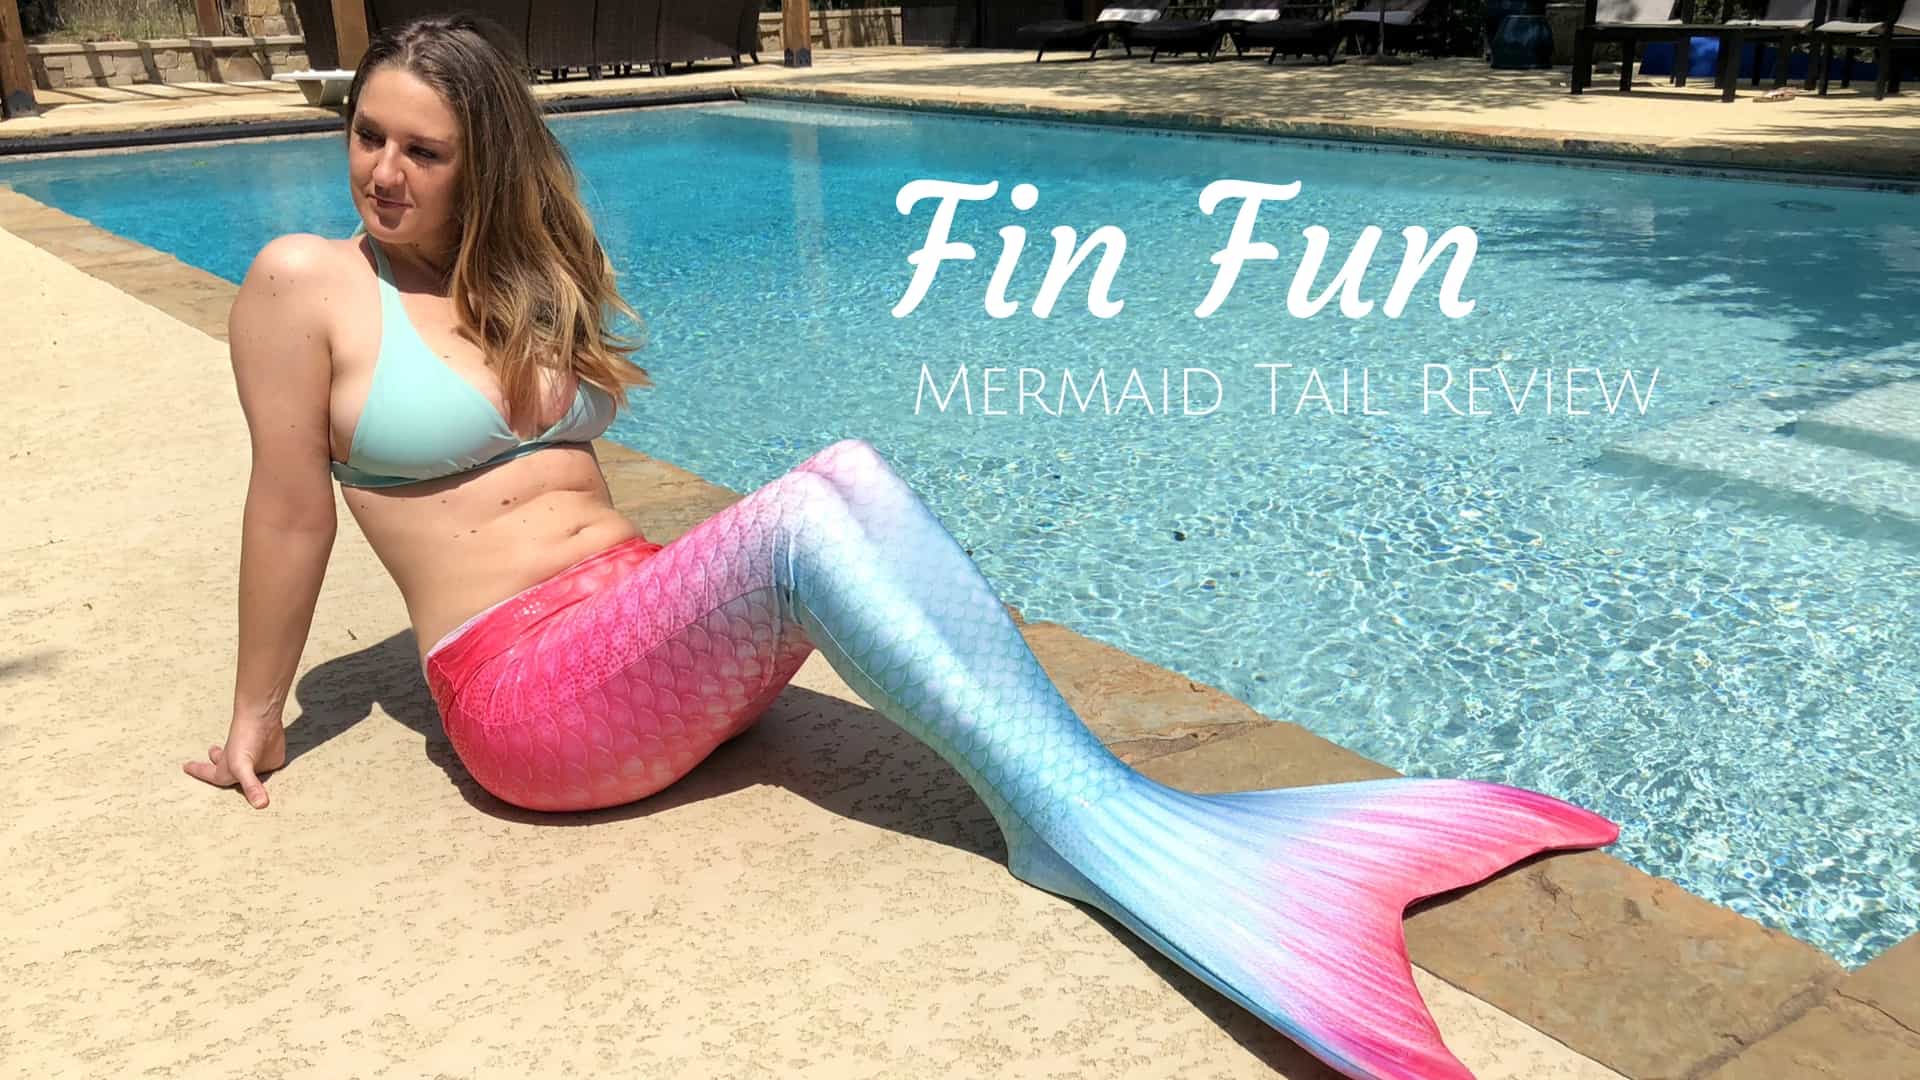 Fin Fun Mermaid Tail Review - With 10% Off Promo Code!